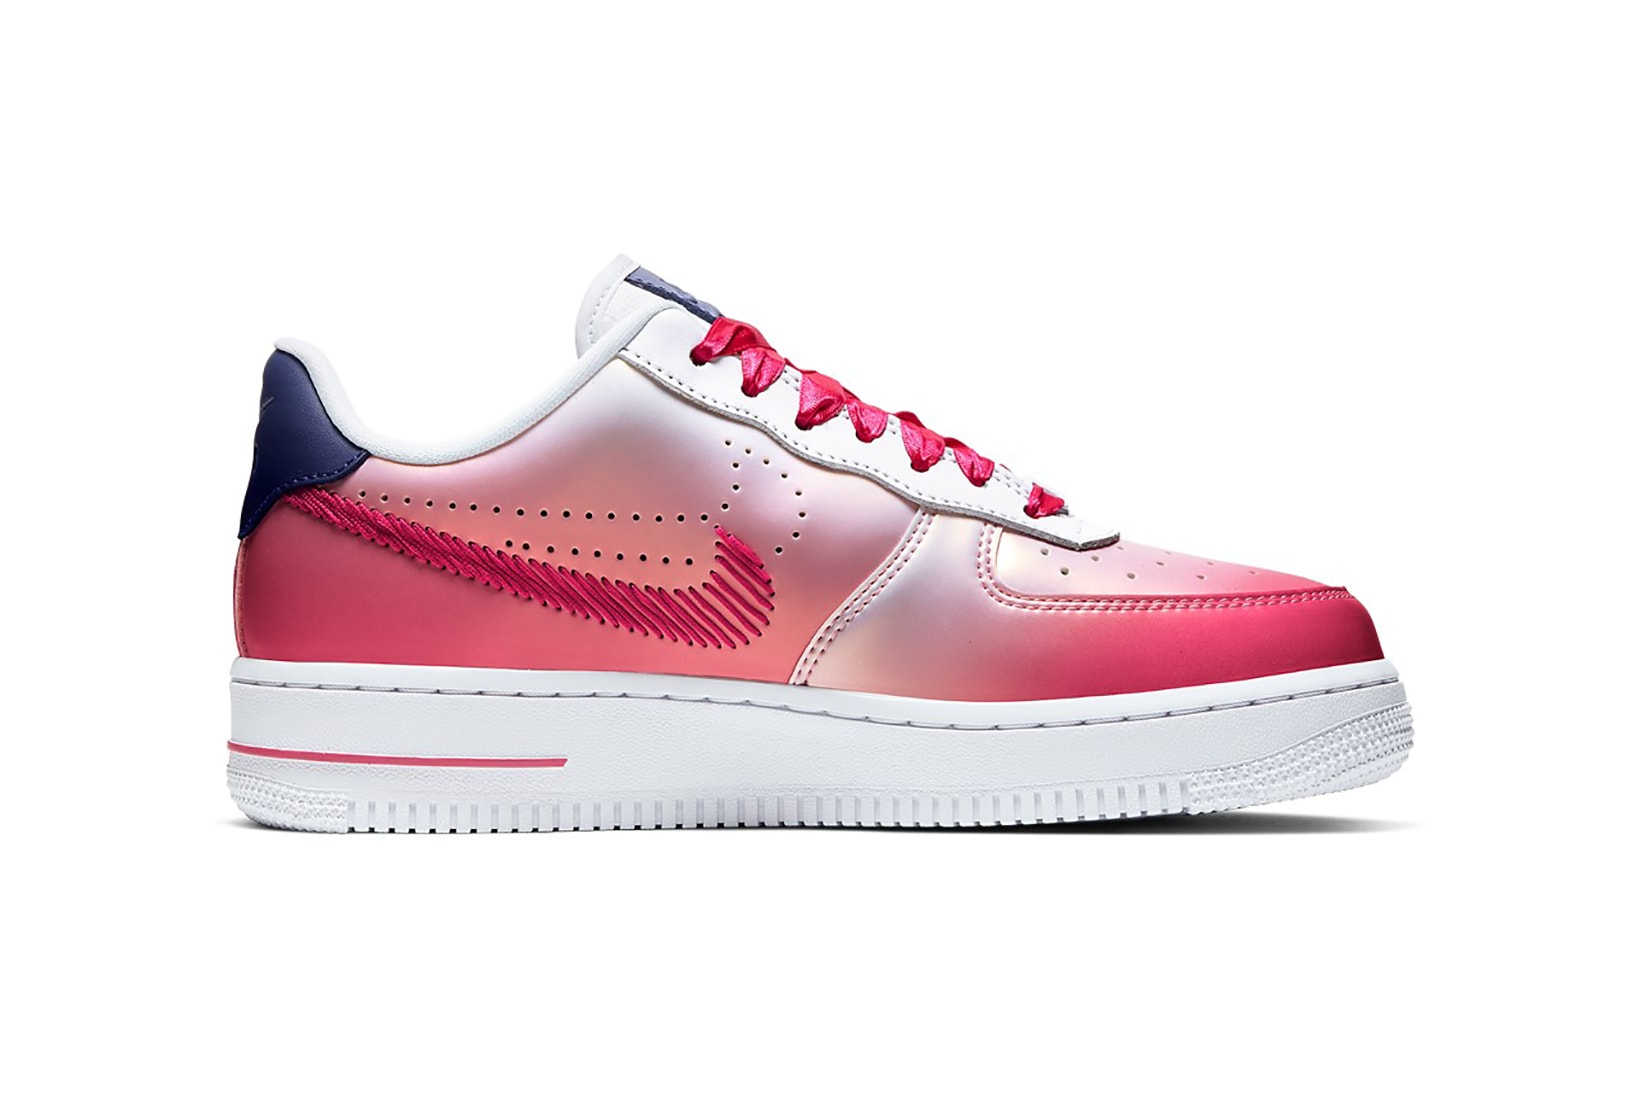 nike air force 1 kay yow cancer fund sneakers collaboration pink white blue shoes sneakerhead